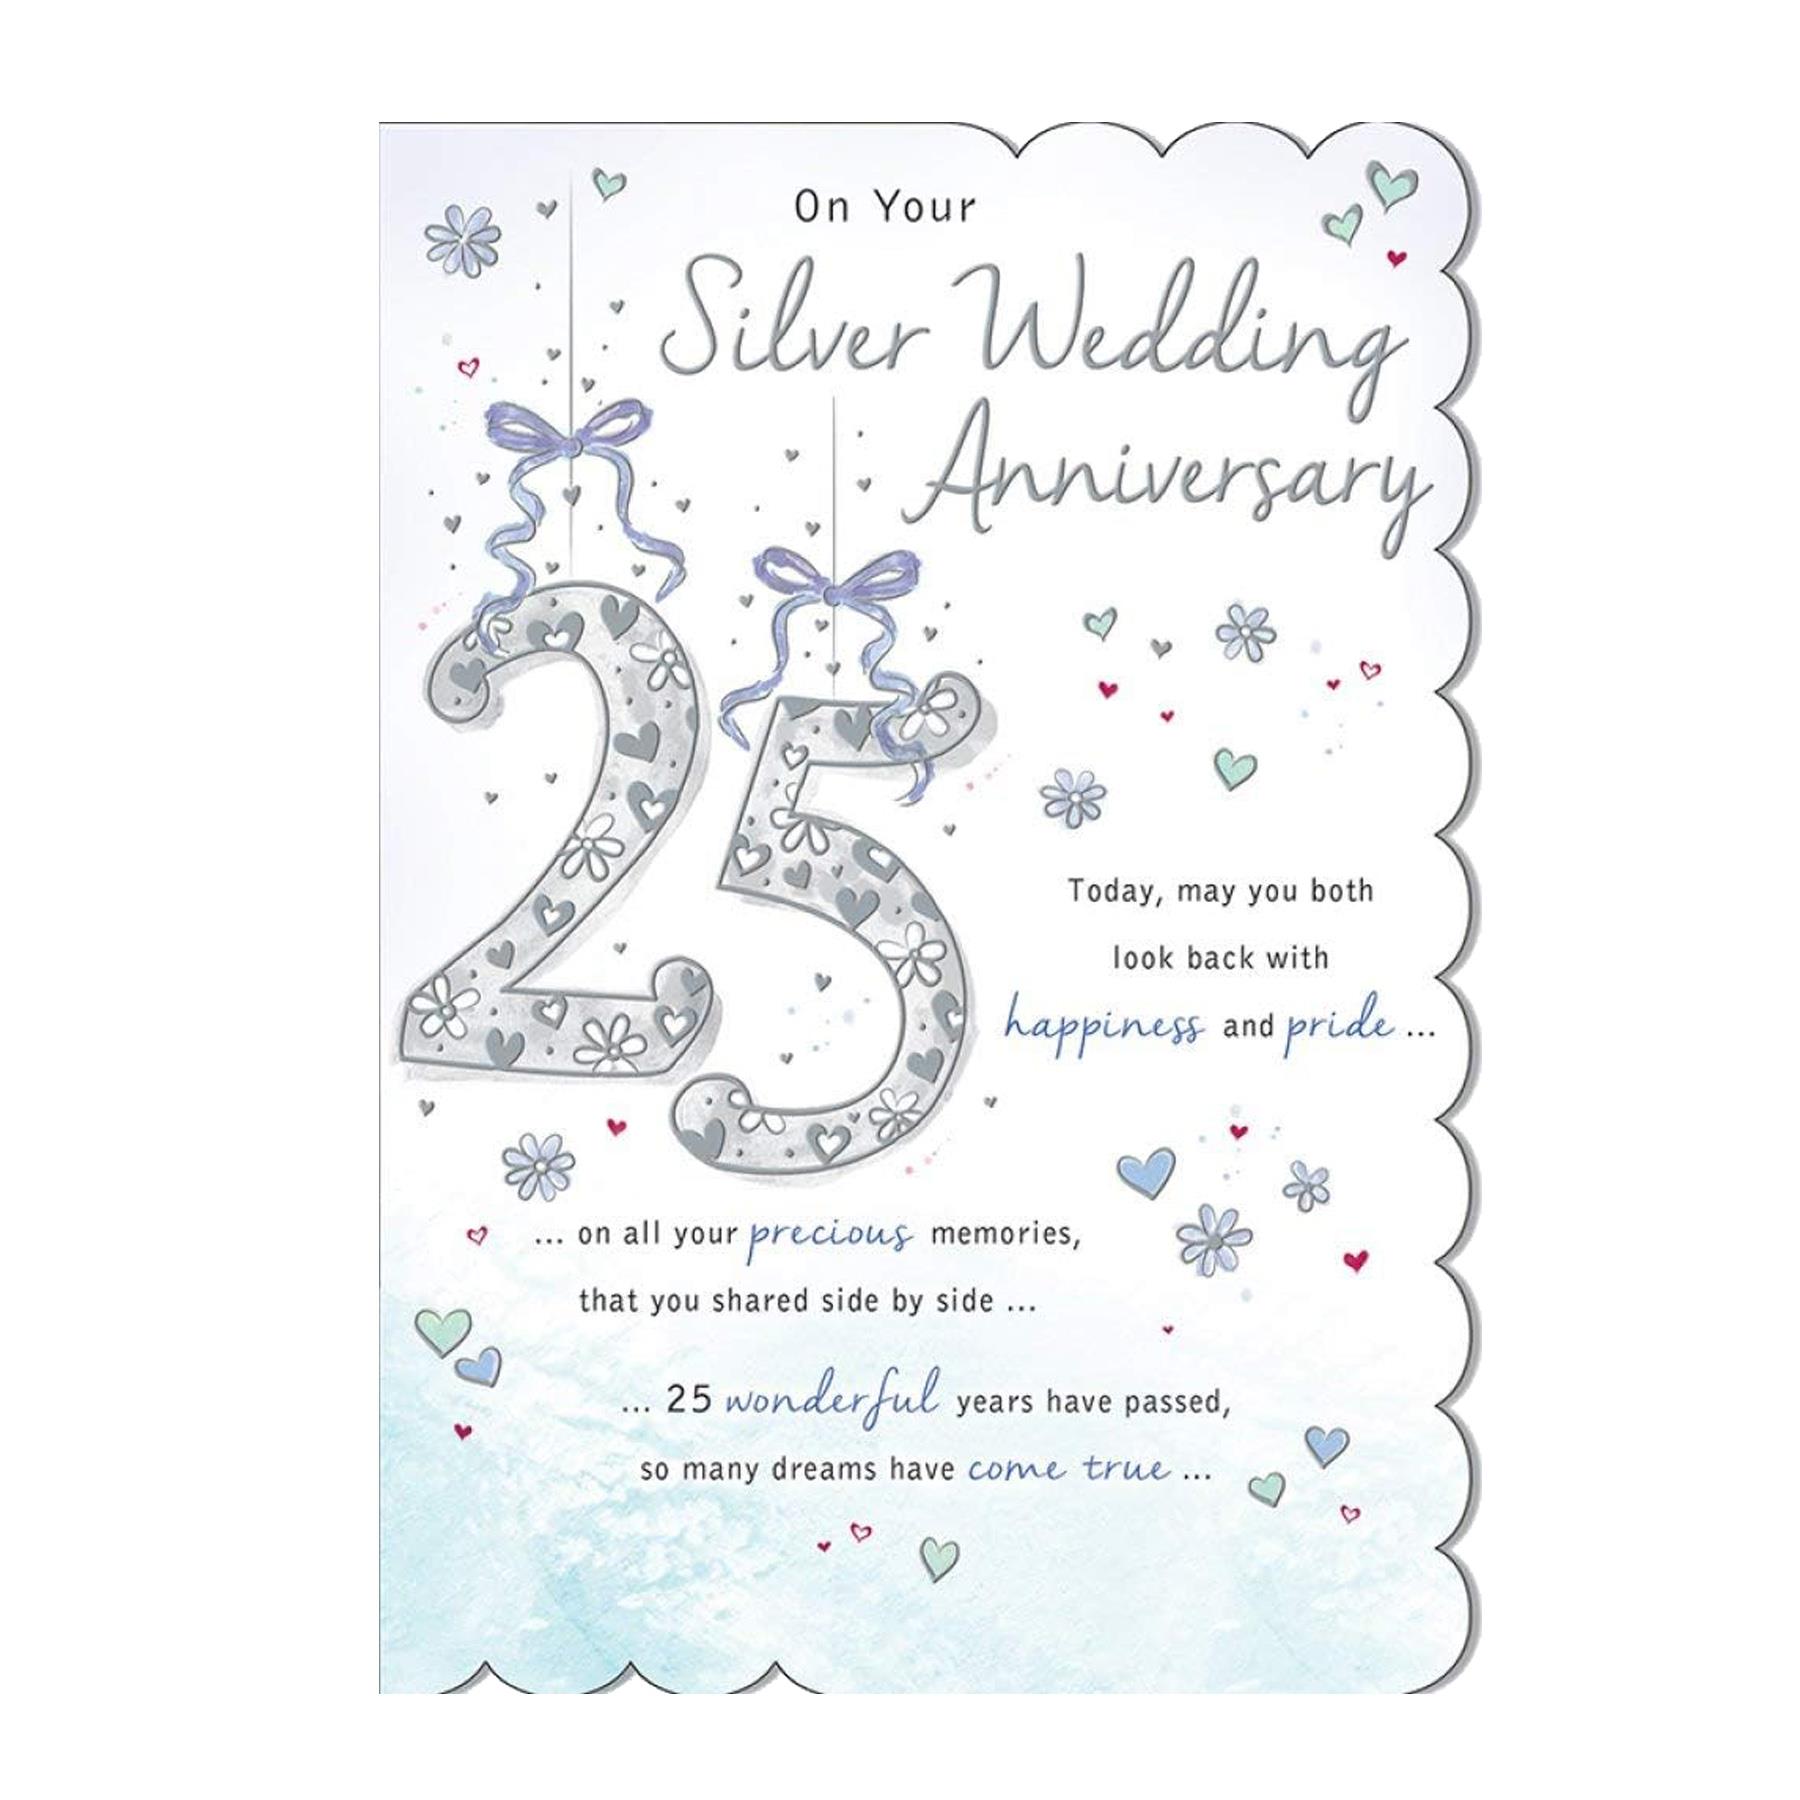 On Your Silver Anniversary Card with Foil Detail, Hanging 25 and White Envelope